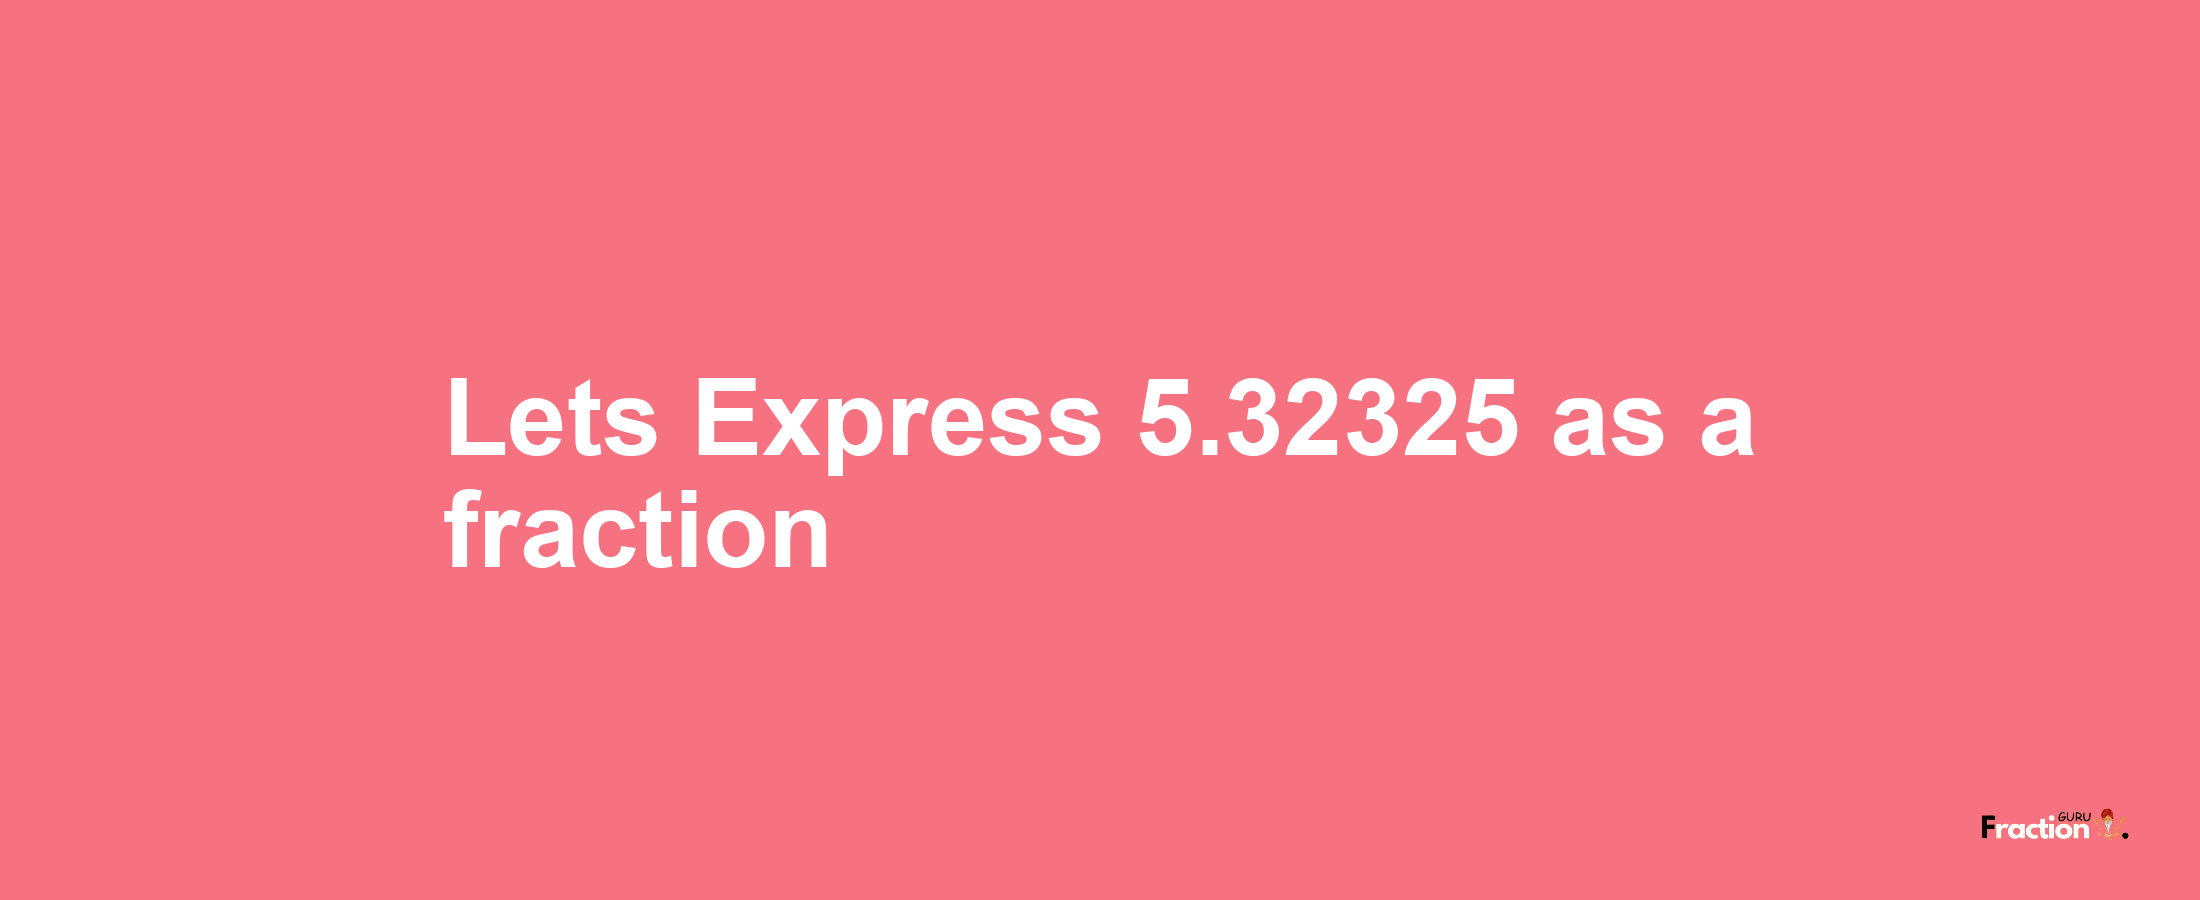 Lets Express 5.32325 as afraction